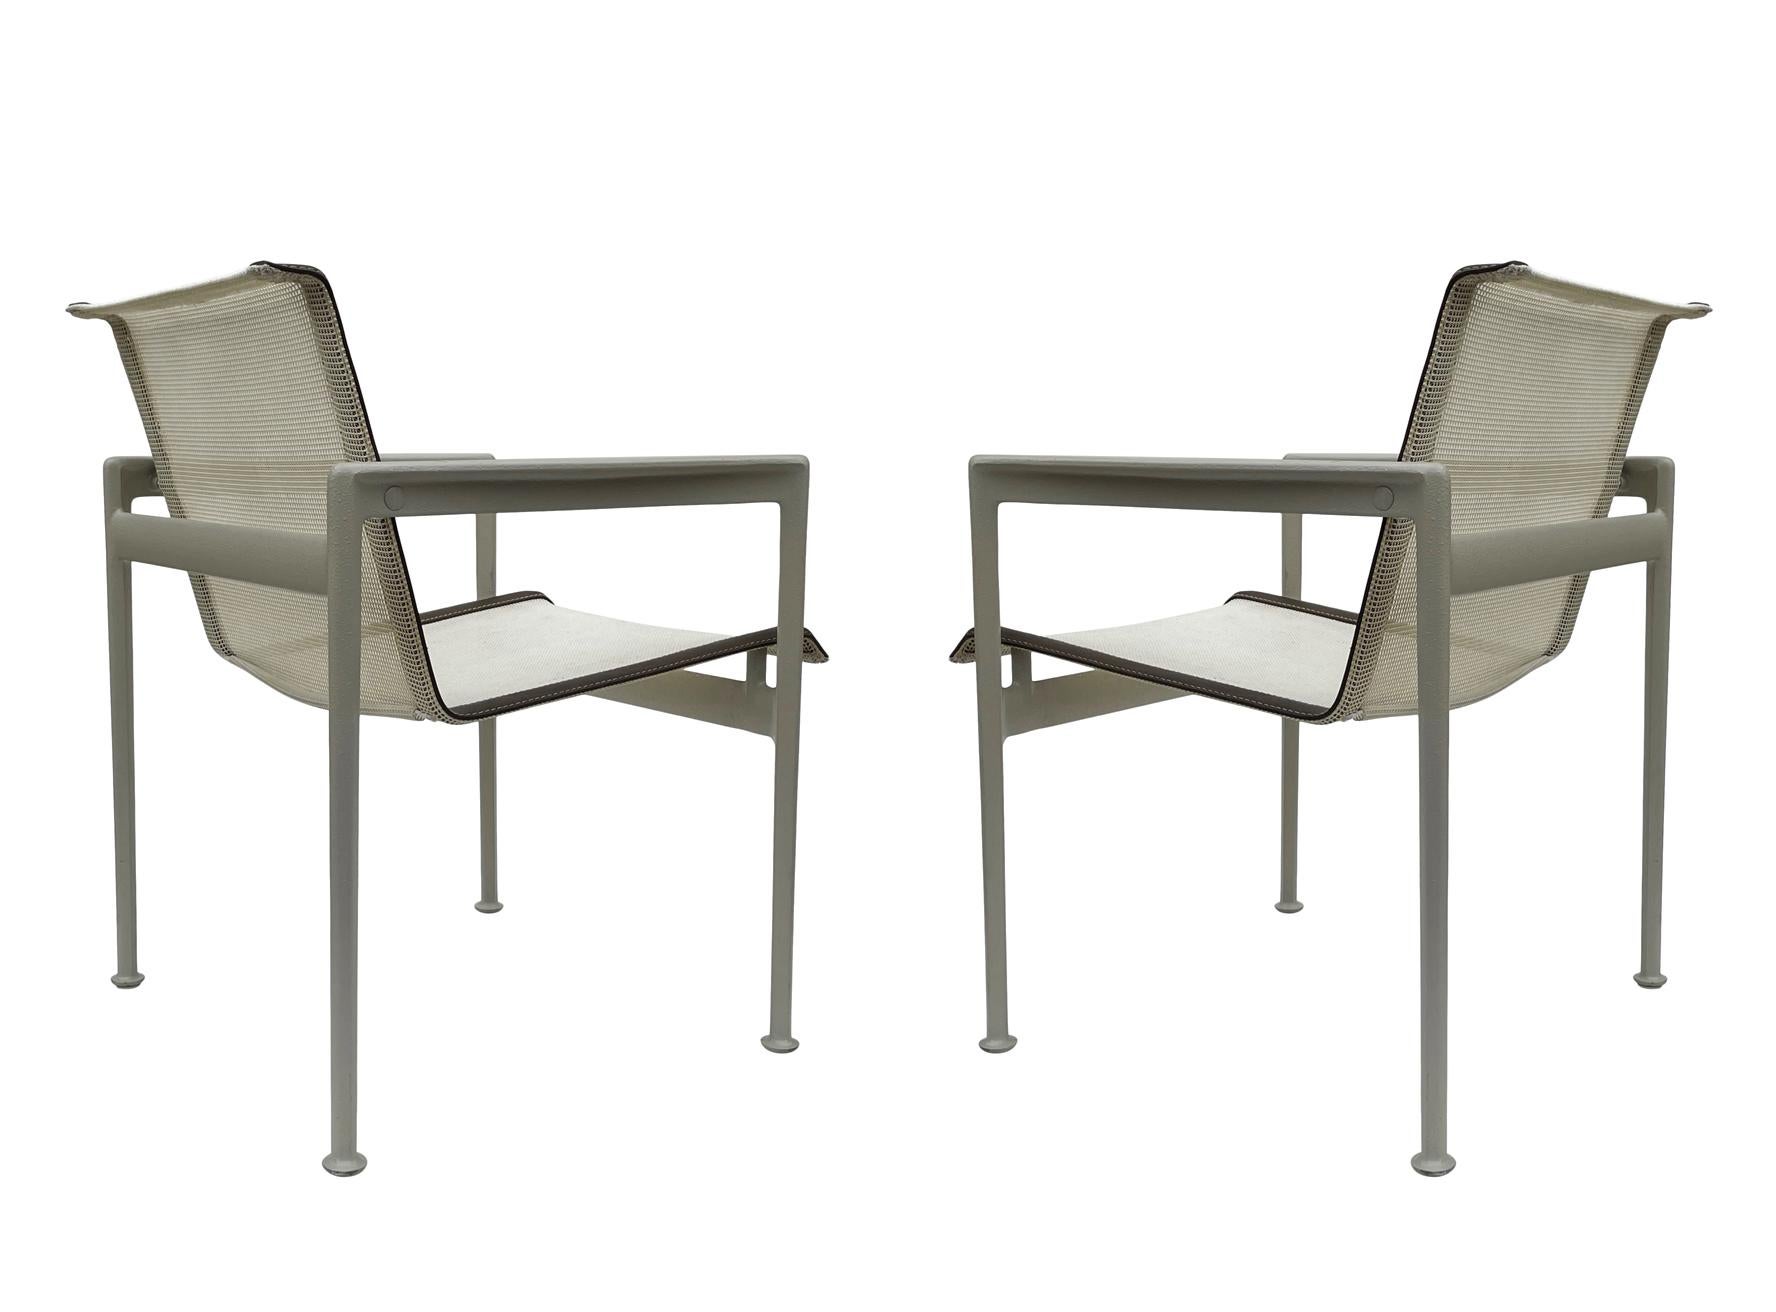 Matching Pair of Mid-Century Modern Outdoor Patio Armchairs by Richard Schultz 1